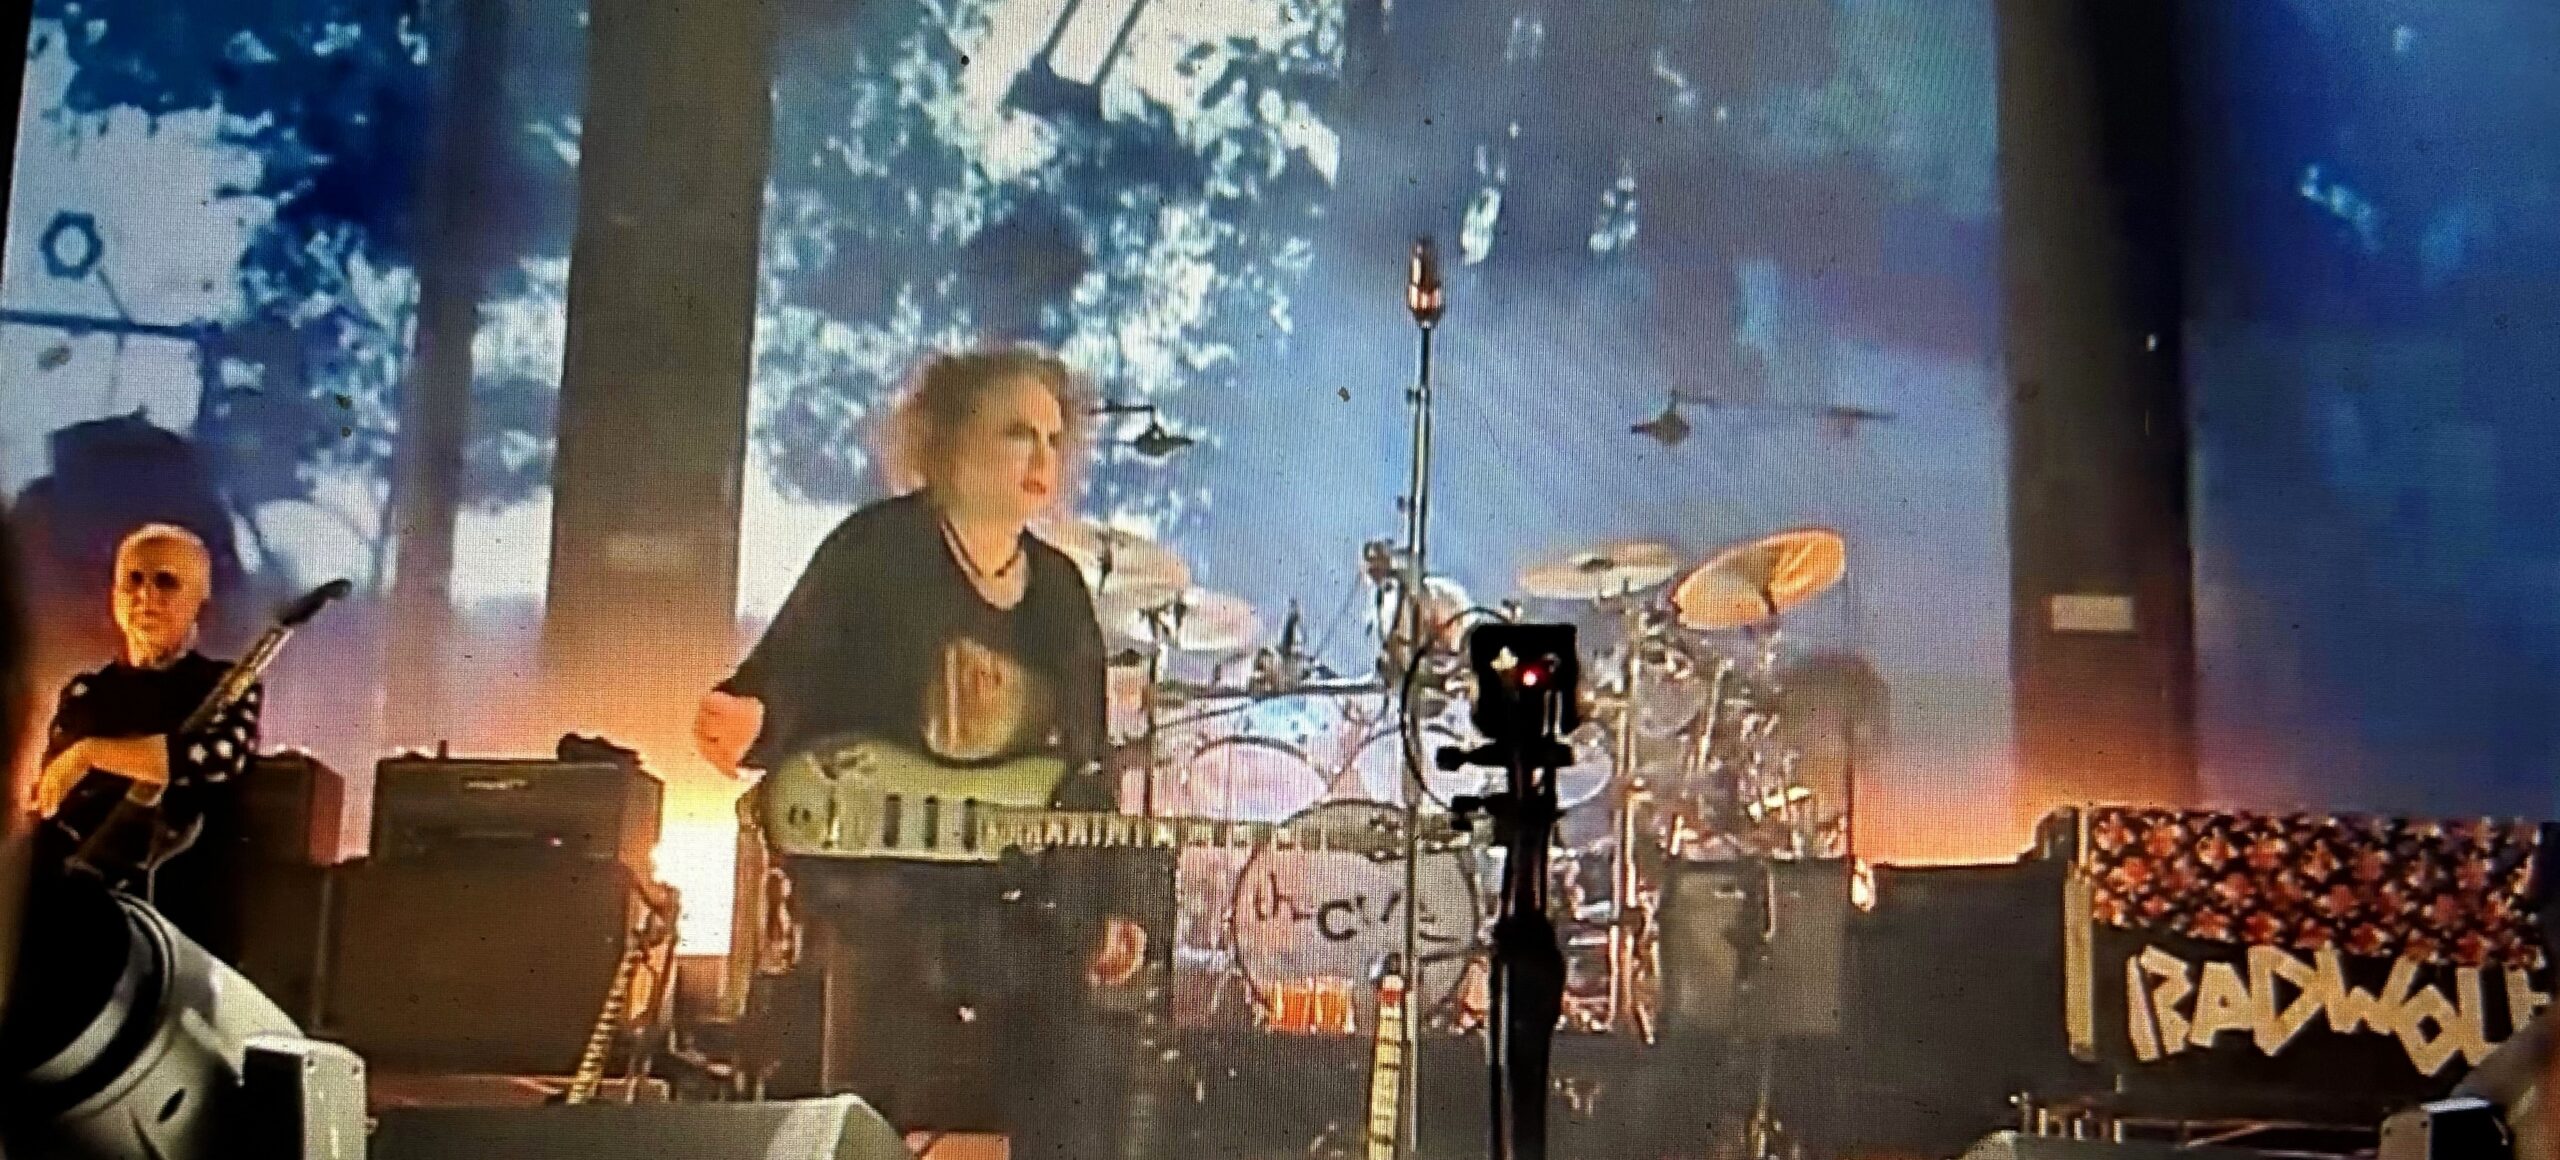 The Cure Discography Recap + Show Review — Obscura Undead